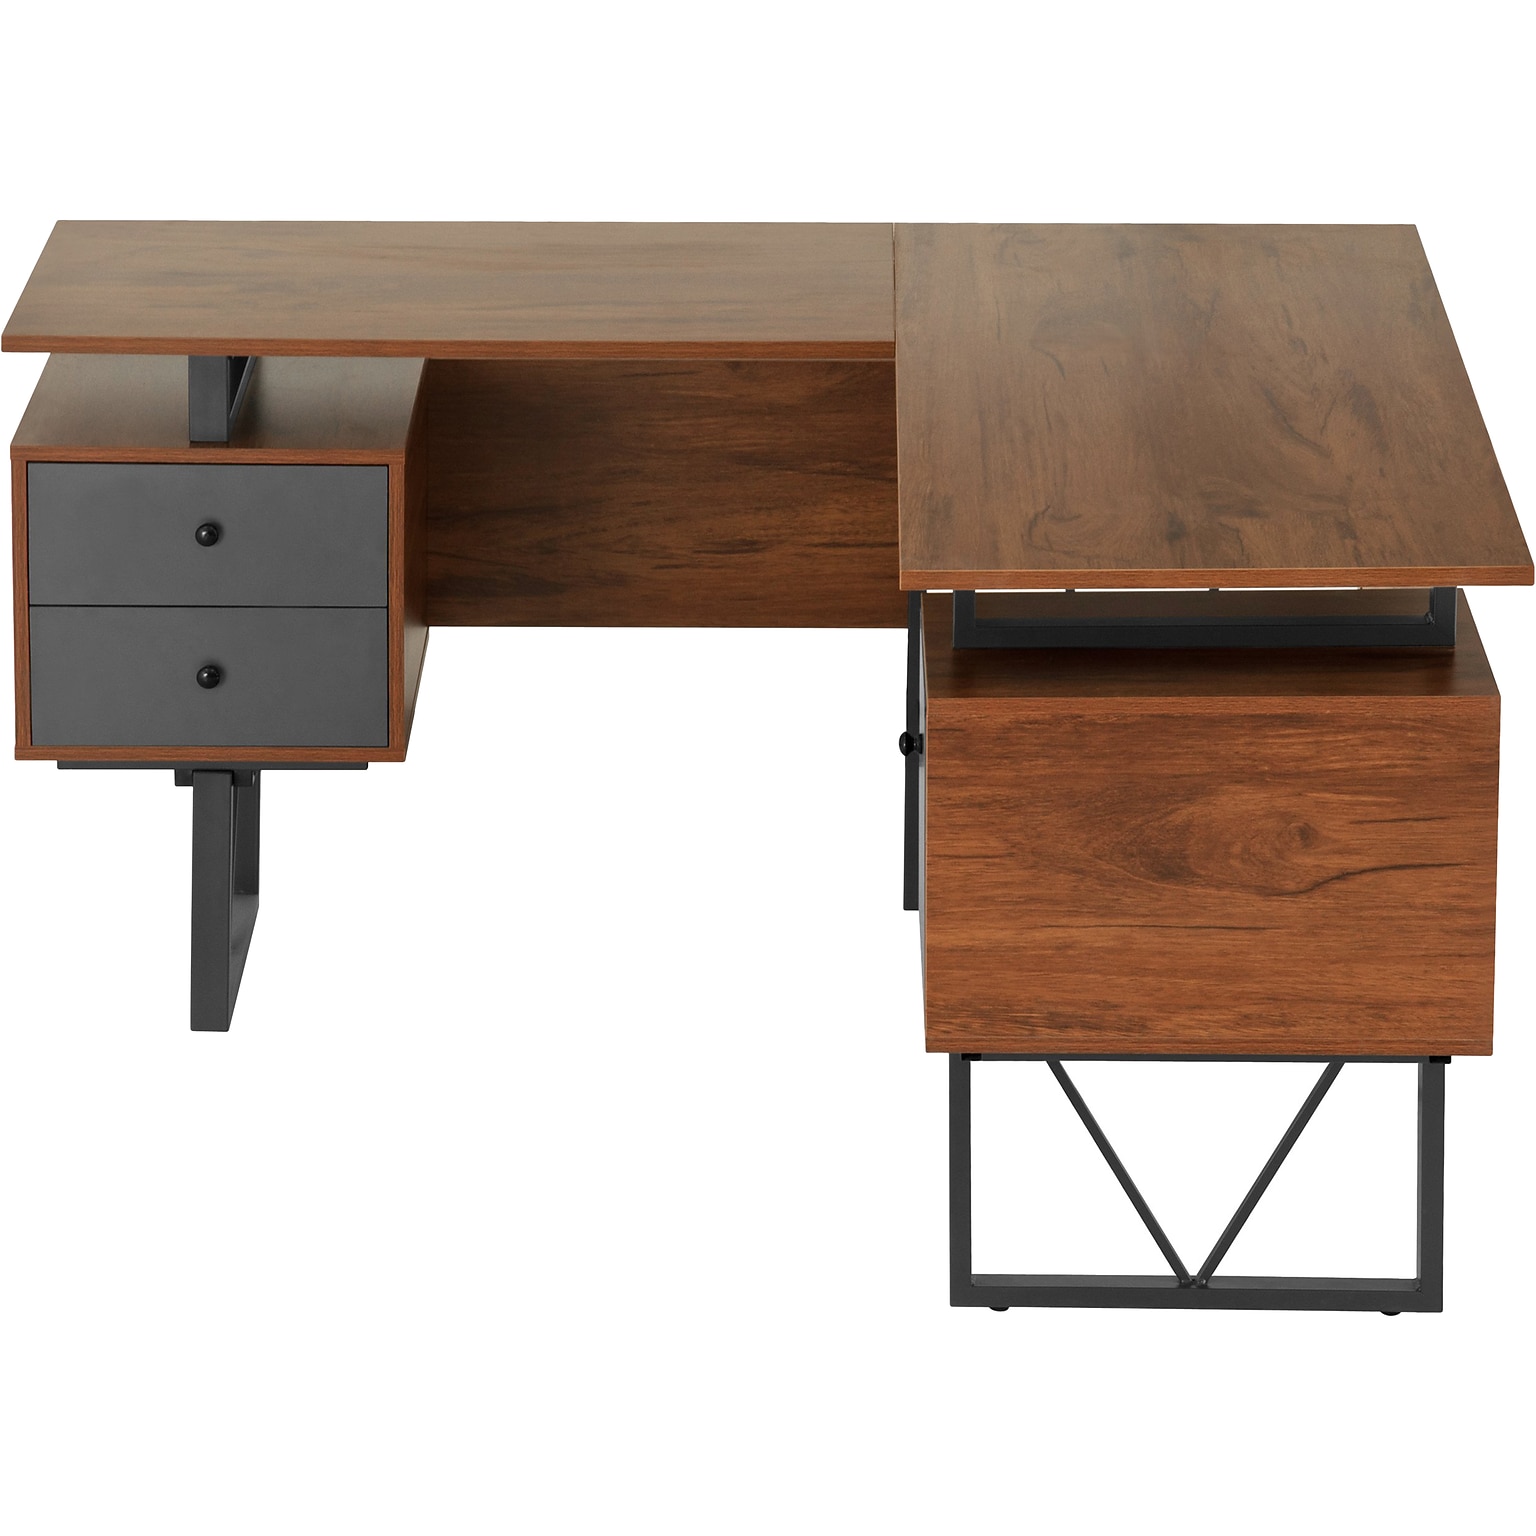 Techni Mobili 59 L-Shaped Desk with Drawers and File Cabinet, Walnut/Black (RTA-4809DL-WAL)